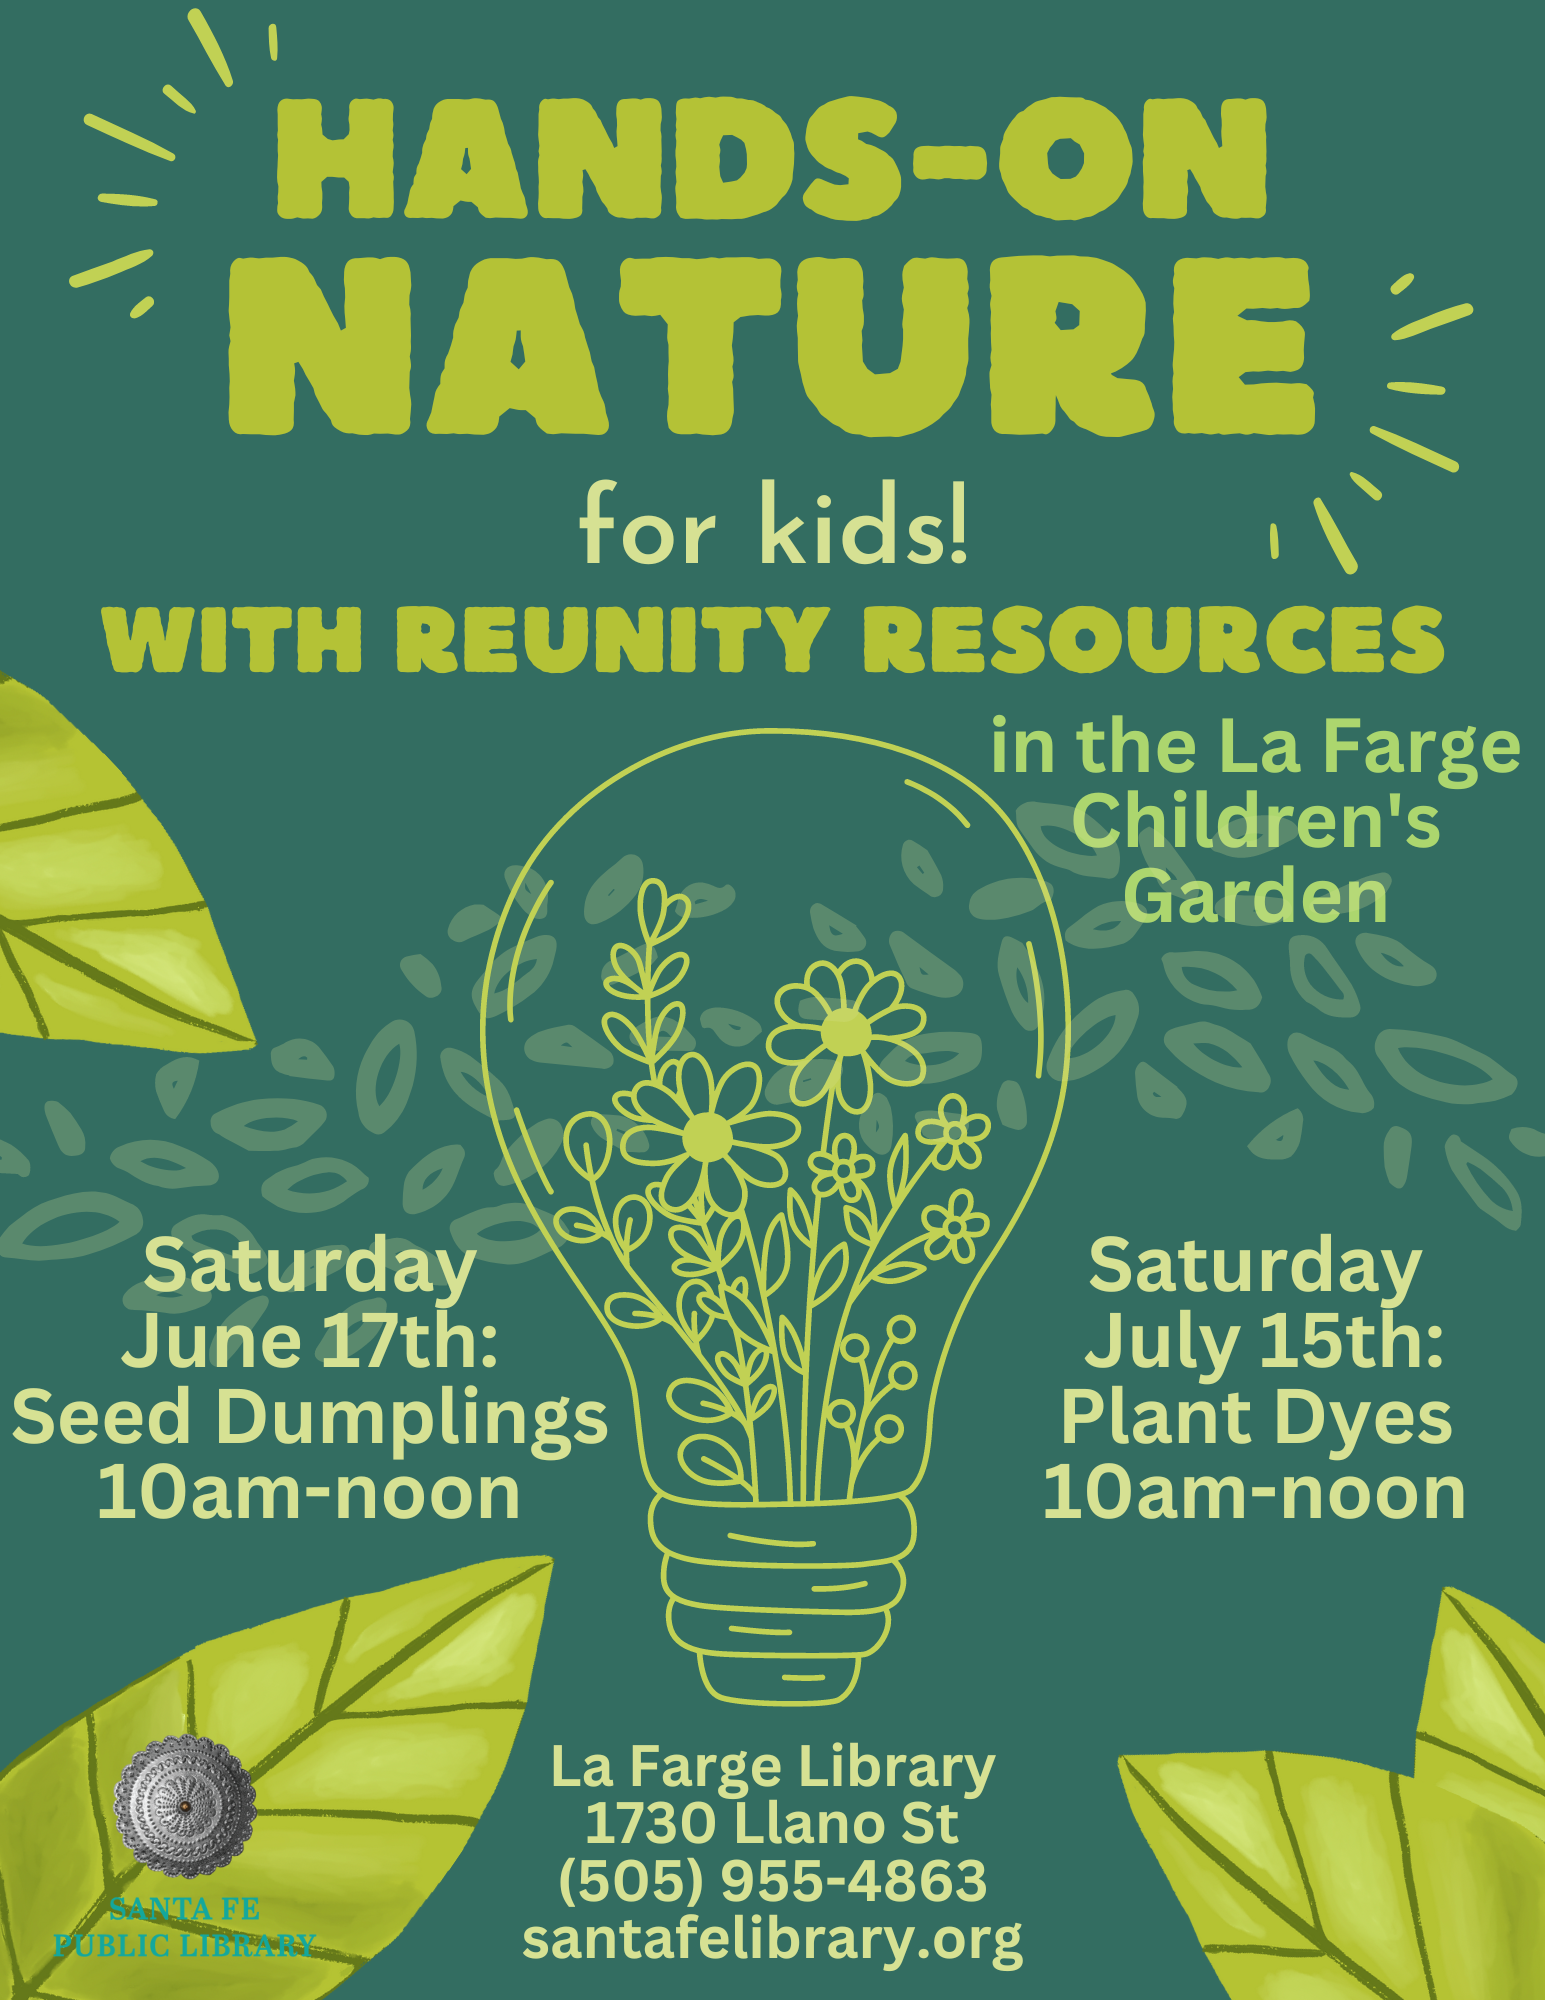 Hands-On Nature with Reunity Resources